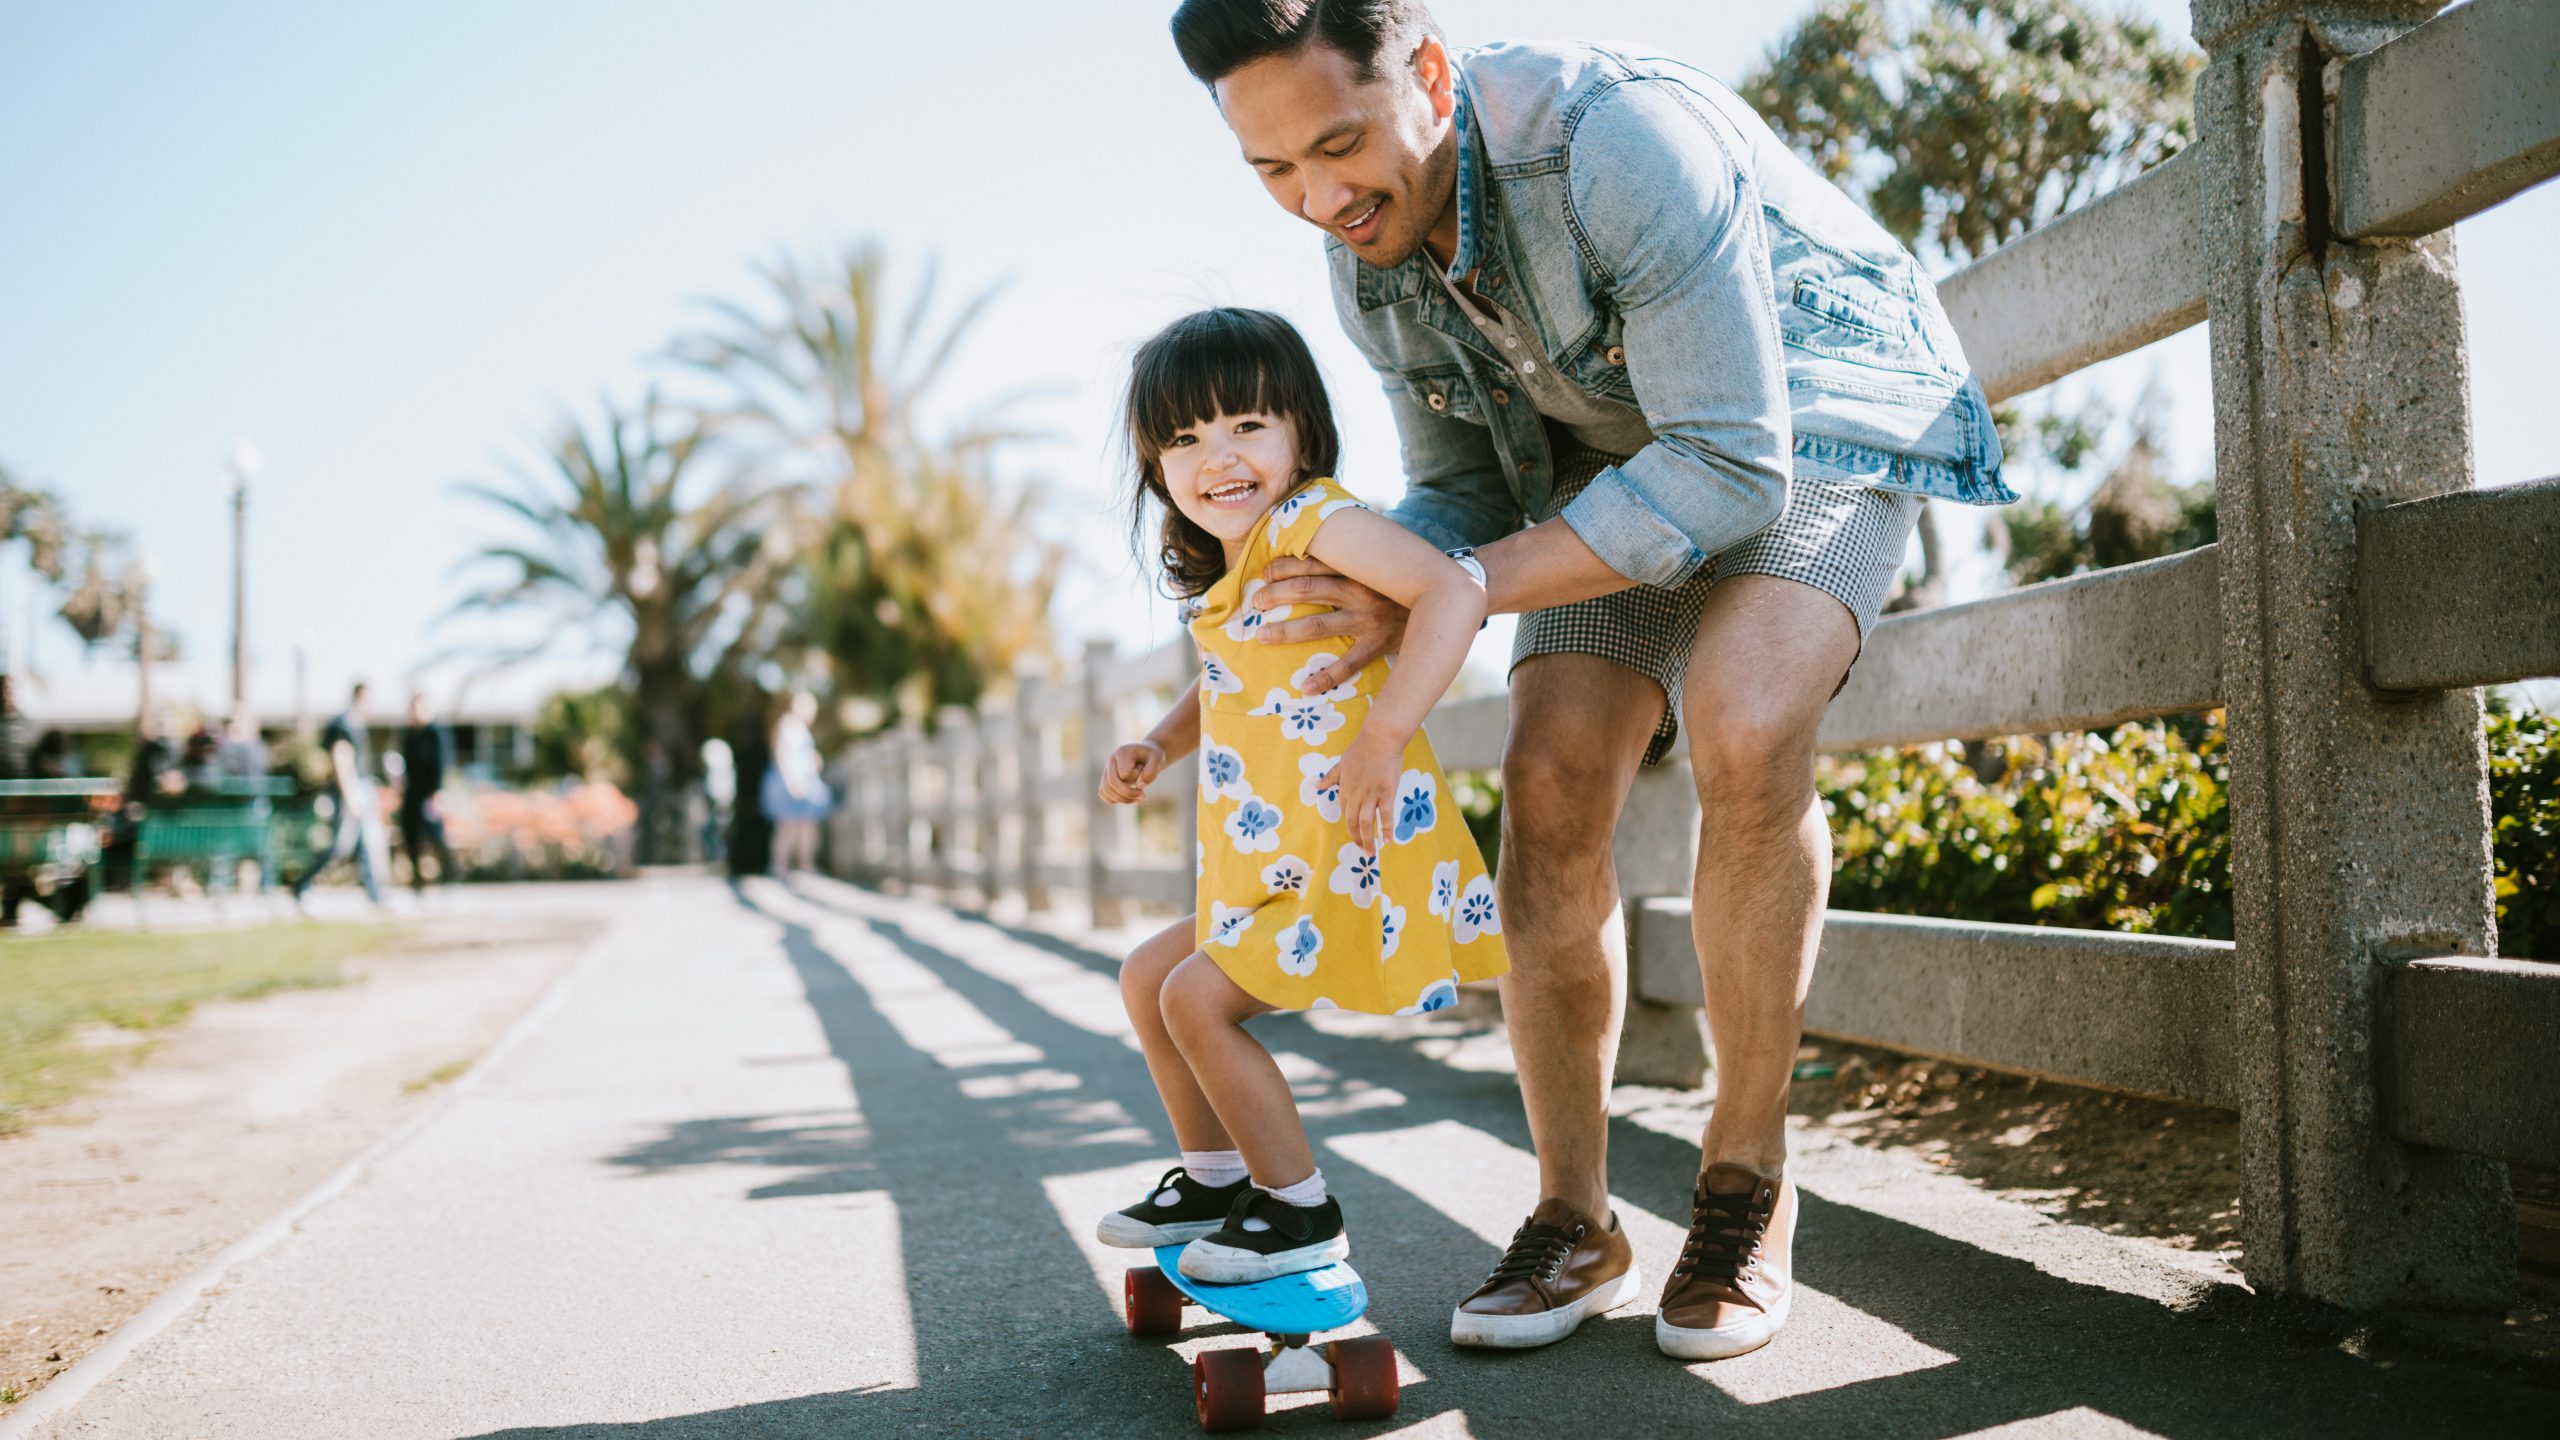 A dad helps his little girl go skateboarding, holding her waist for support. Shot in Los Angeles, California by the Santa Monica Pier.